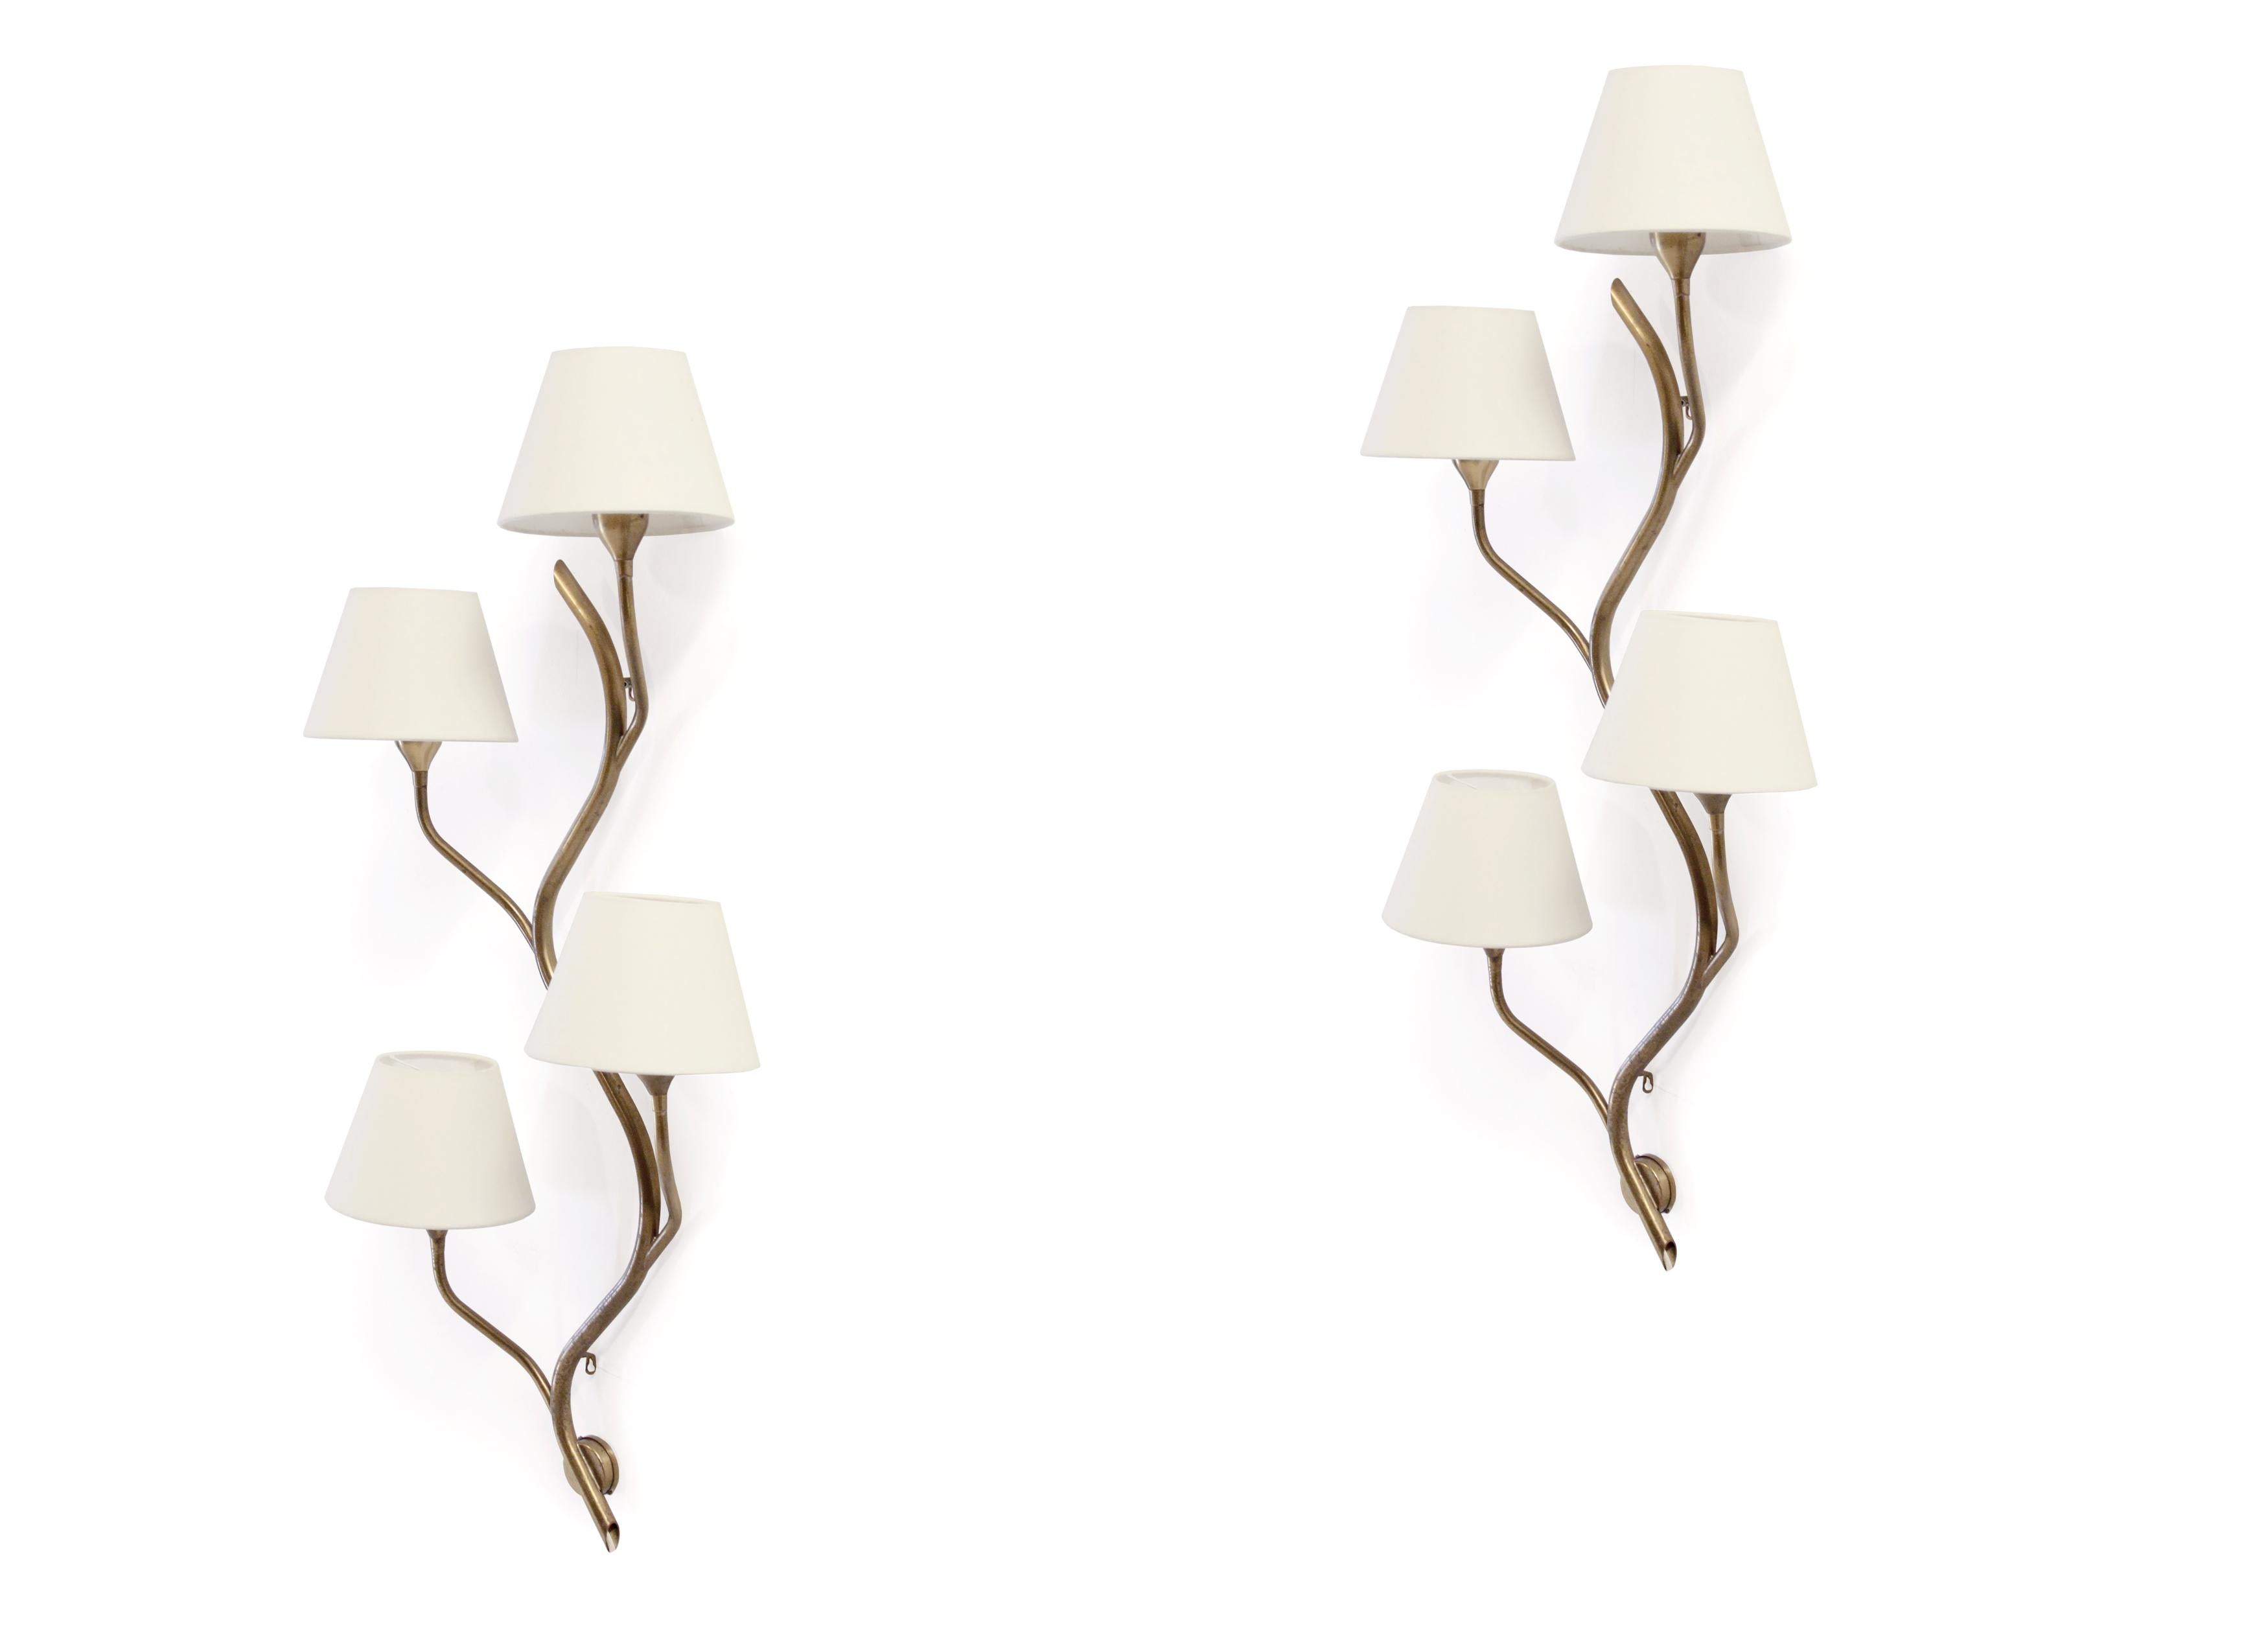 Wonderful and organic pair of four-armed wall lamps in brass. The lamps are designed and made in Norway by Astra from circa 1960s second half. Both lamps are fully working and in excellent vintage condition with some minor age related surface marks.